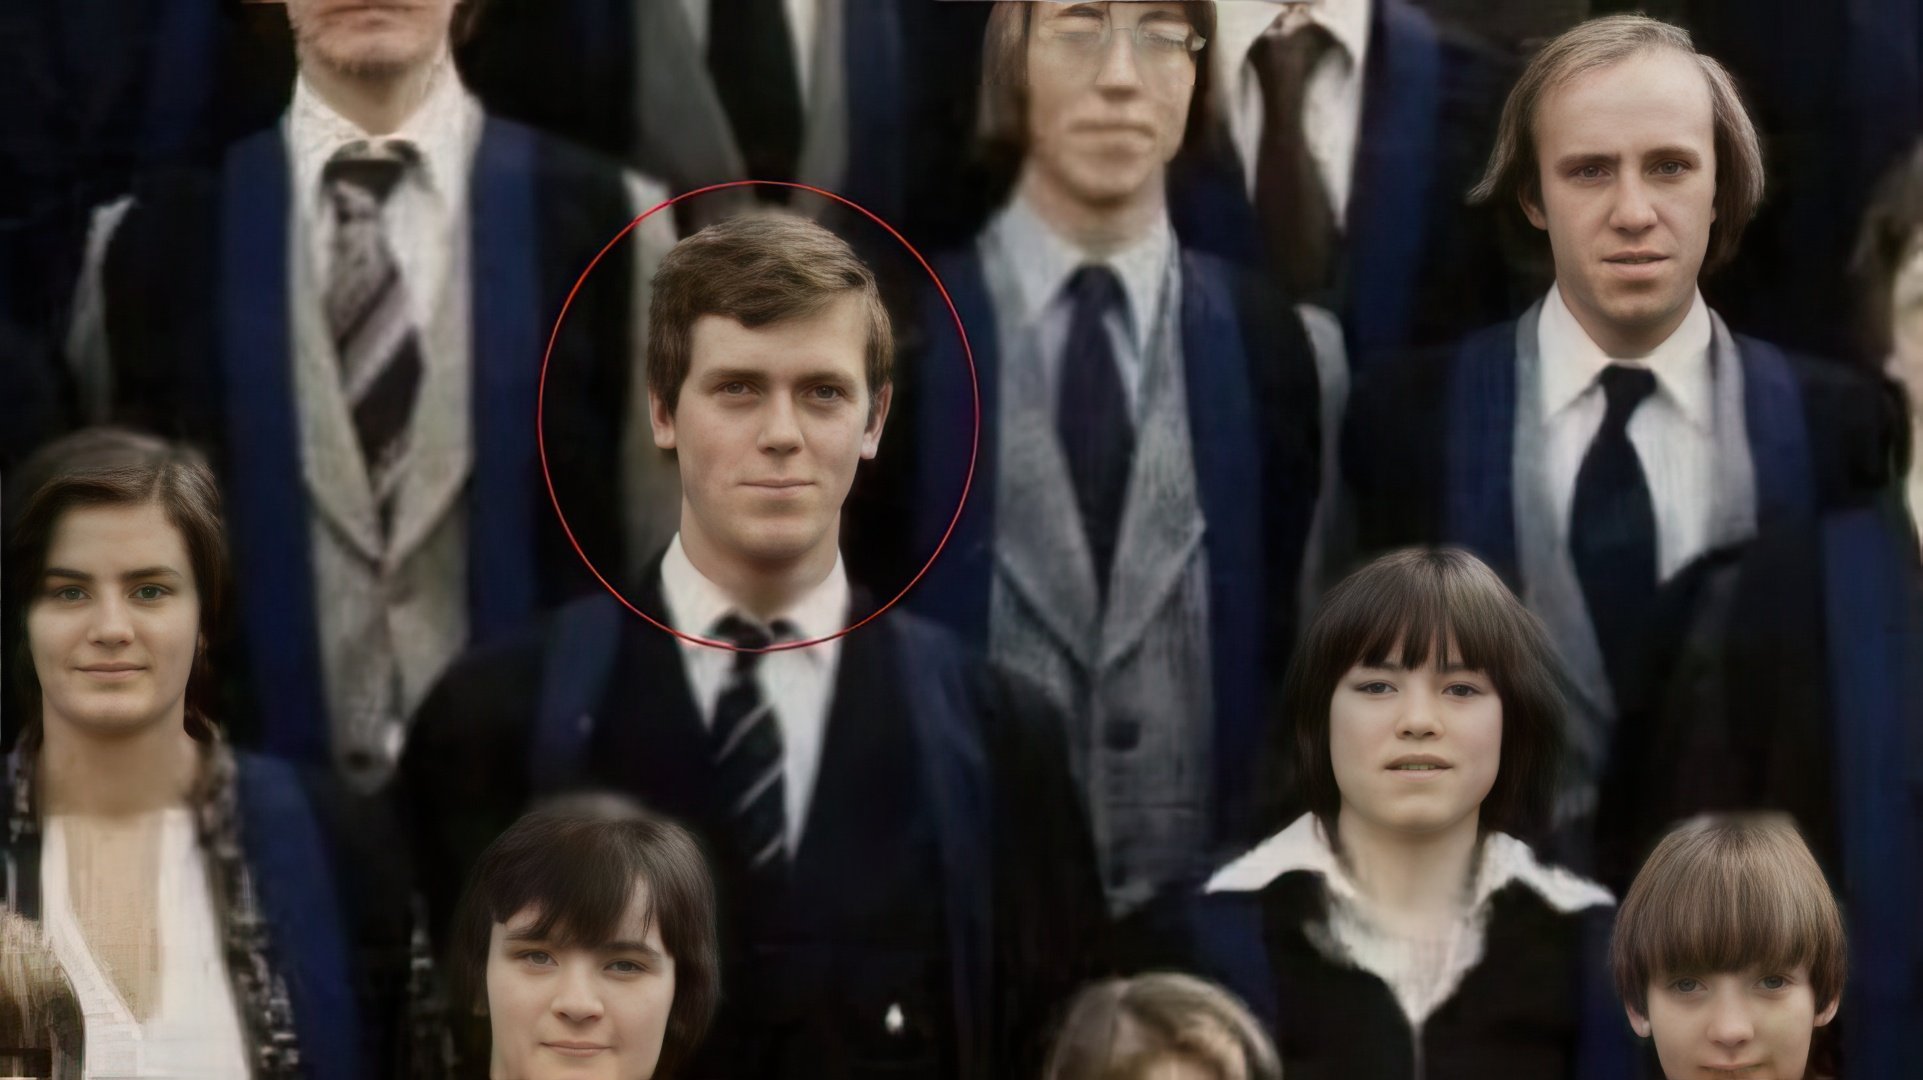 Hugh Laurie in his youth